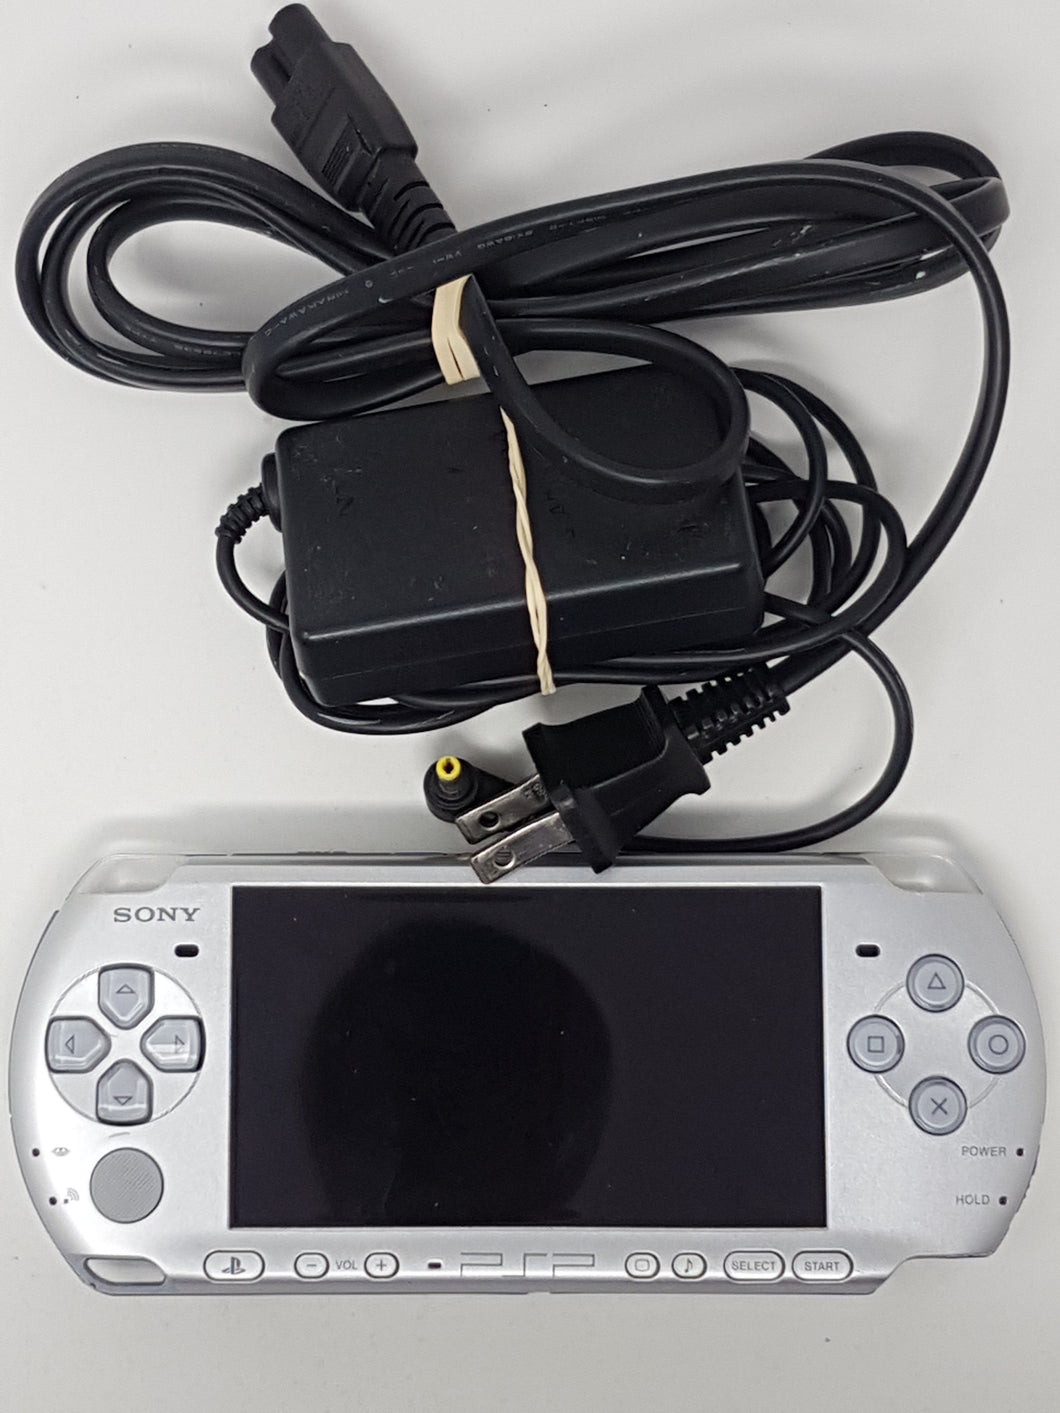 PSP 3001 Mystic Silver [Console] - Sony PSP